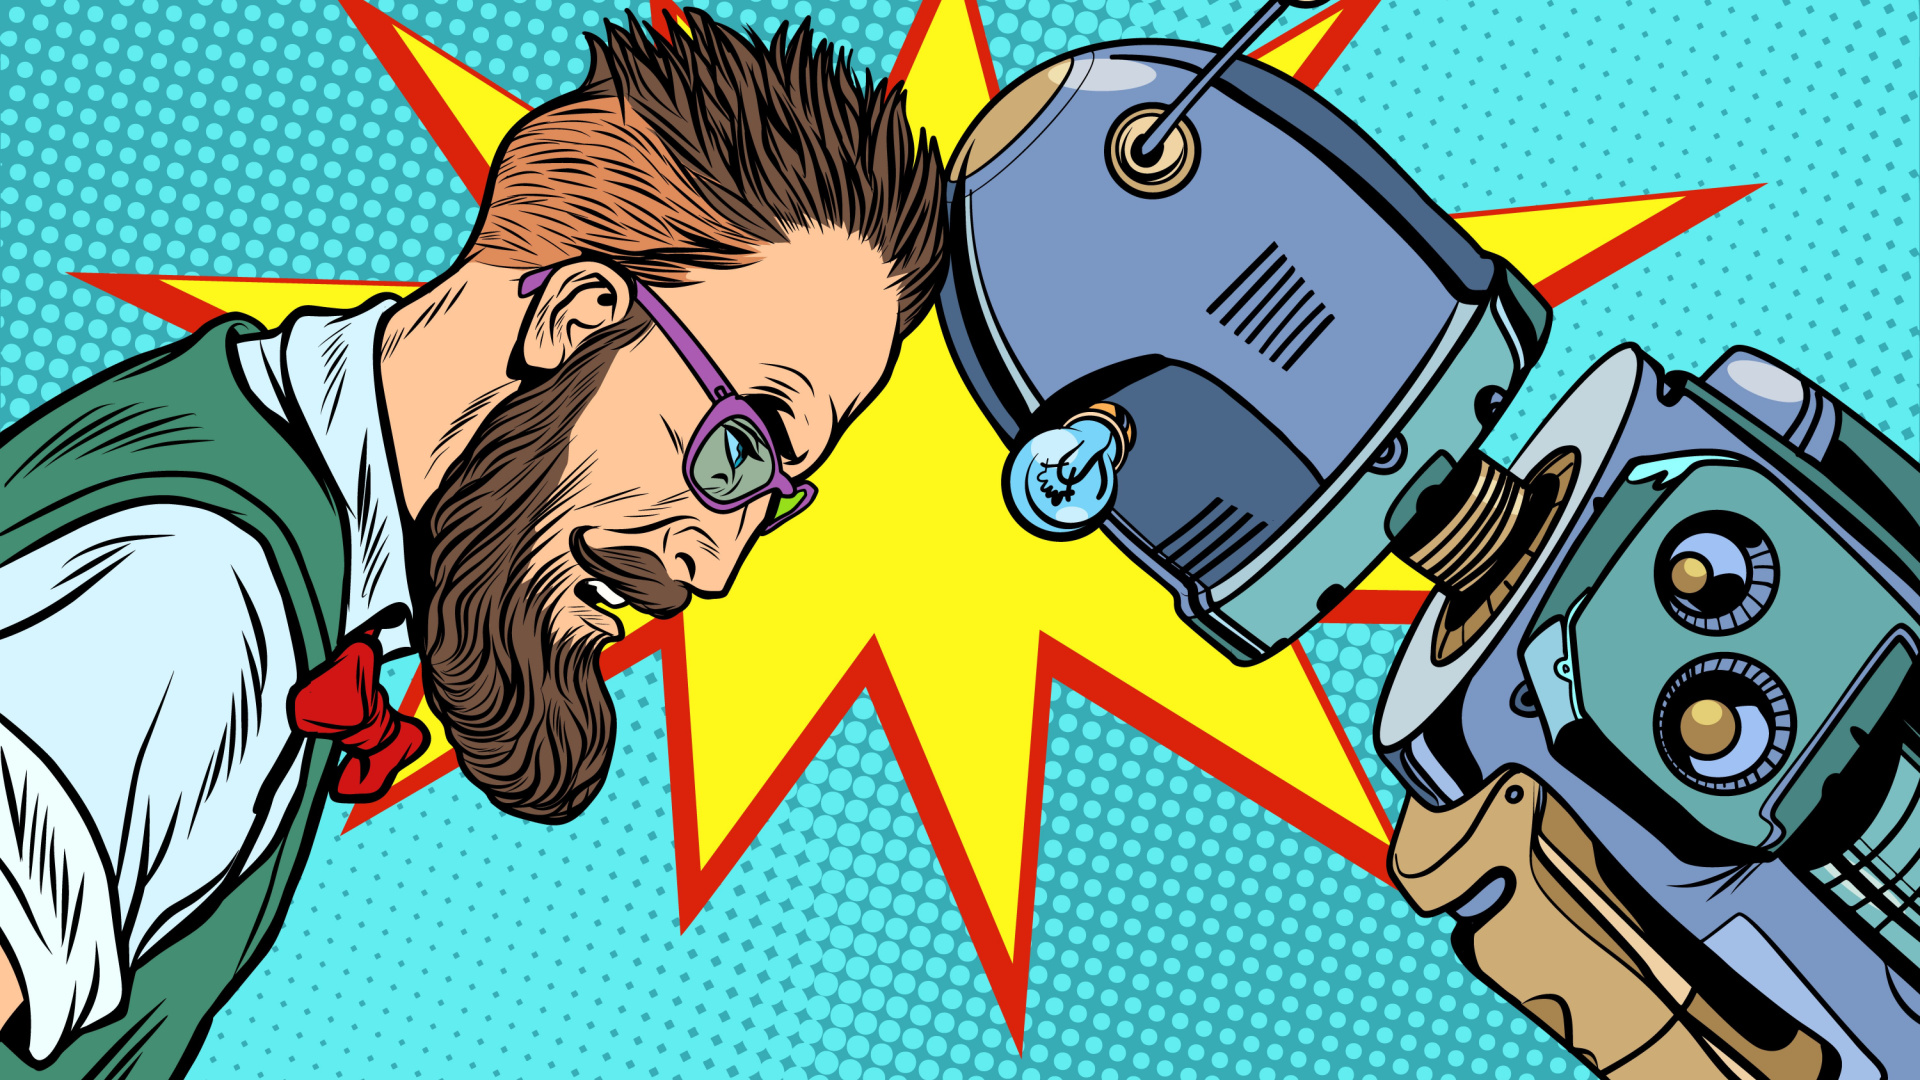 Retro illustration of a man and robot butting heads